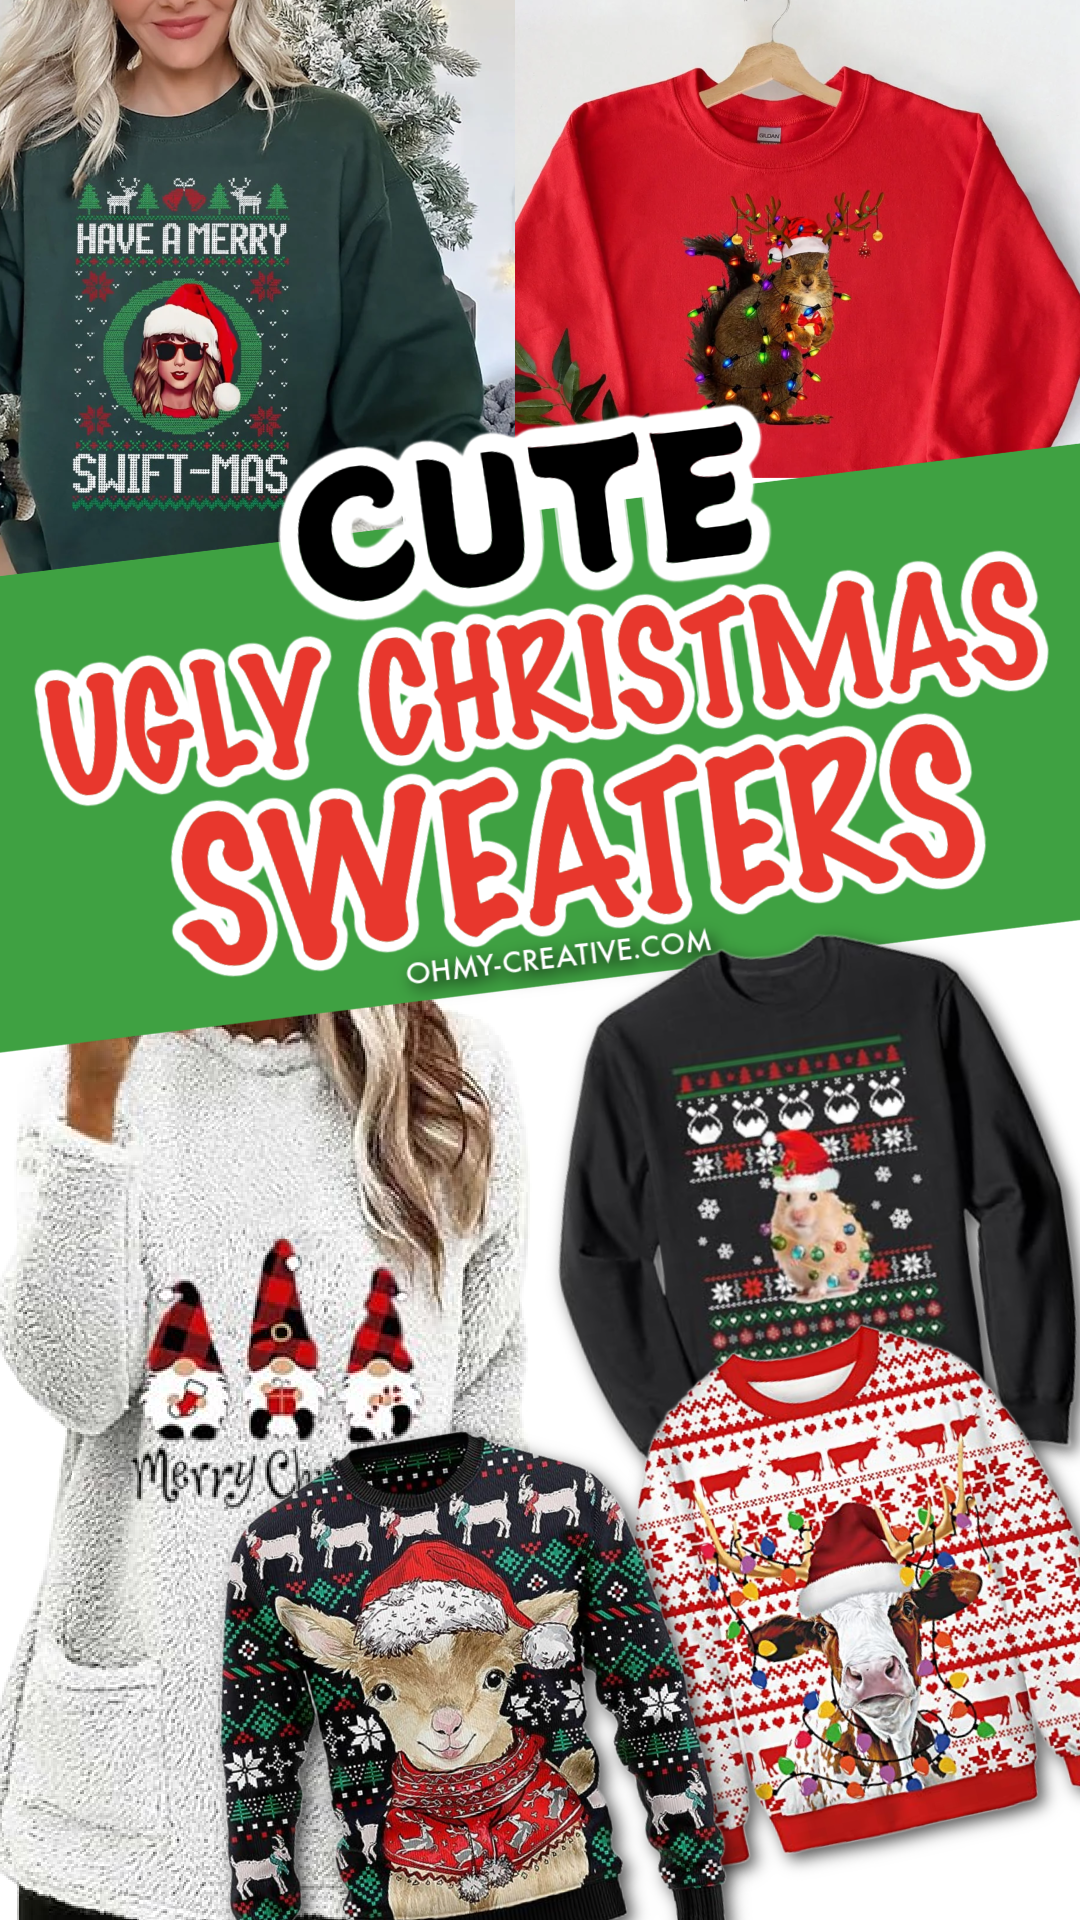 A collage of cute ugly Christmas sweaters for holiday parties or ugly Christmas Sweater parties.